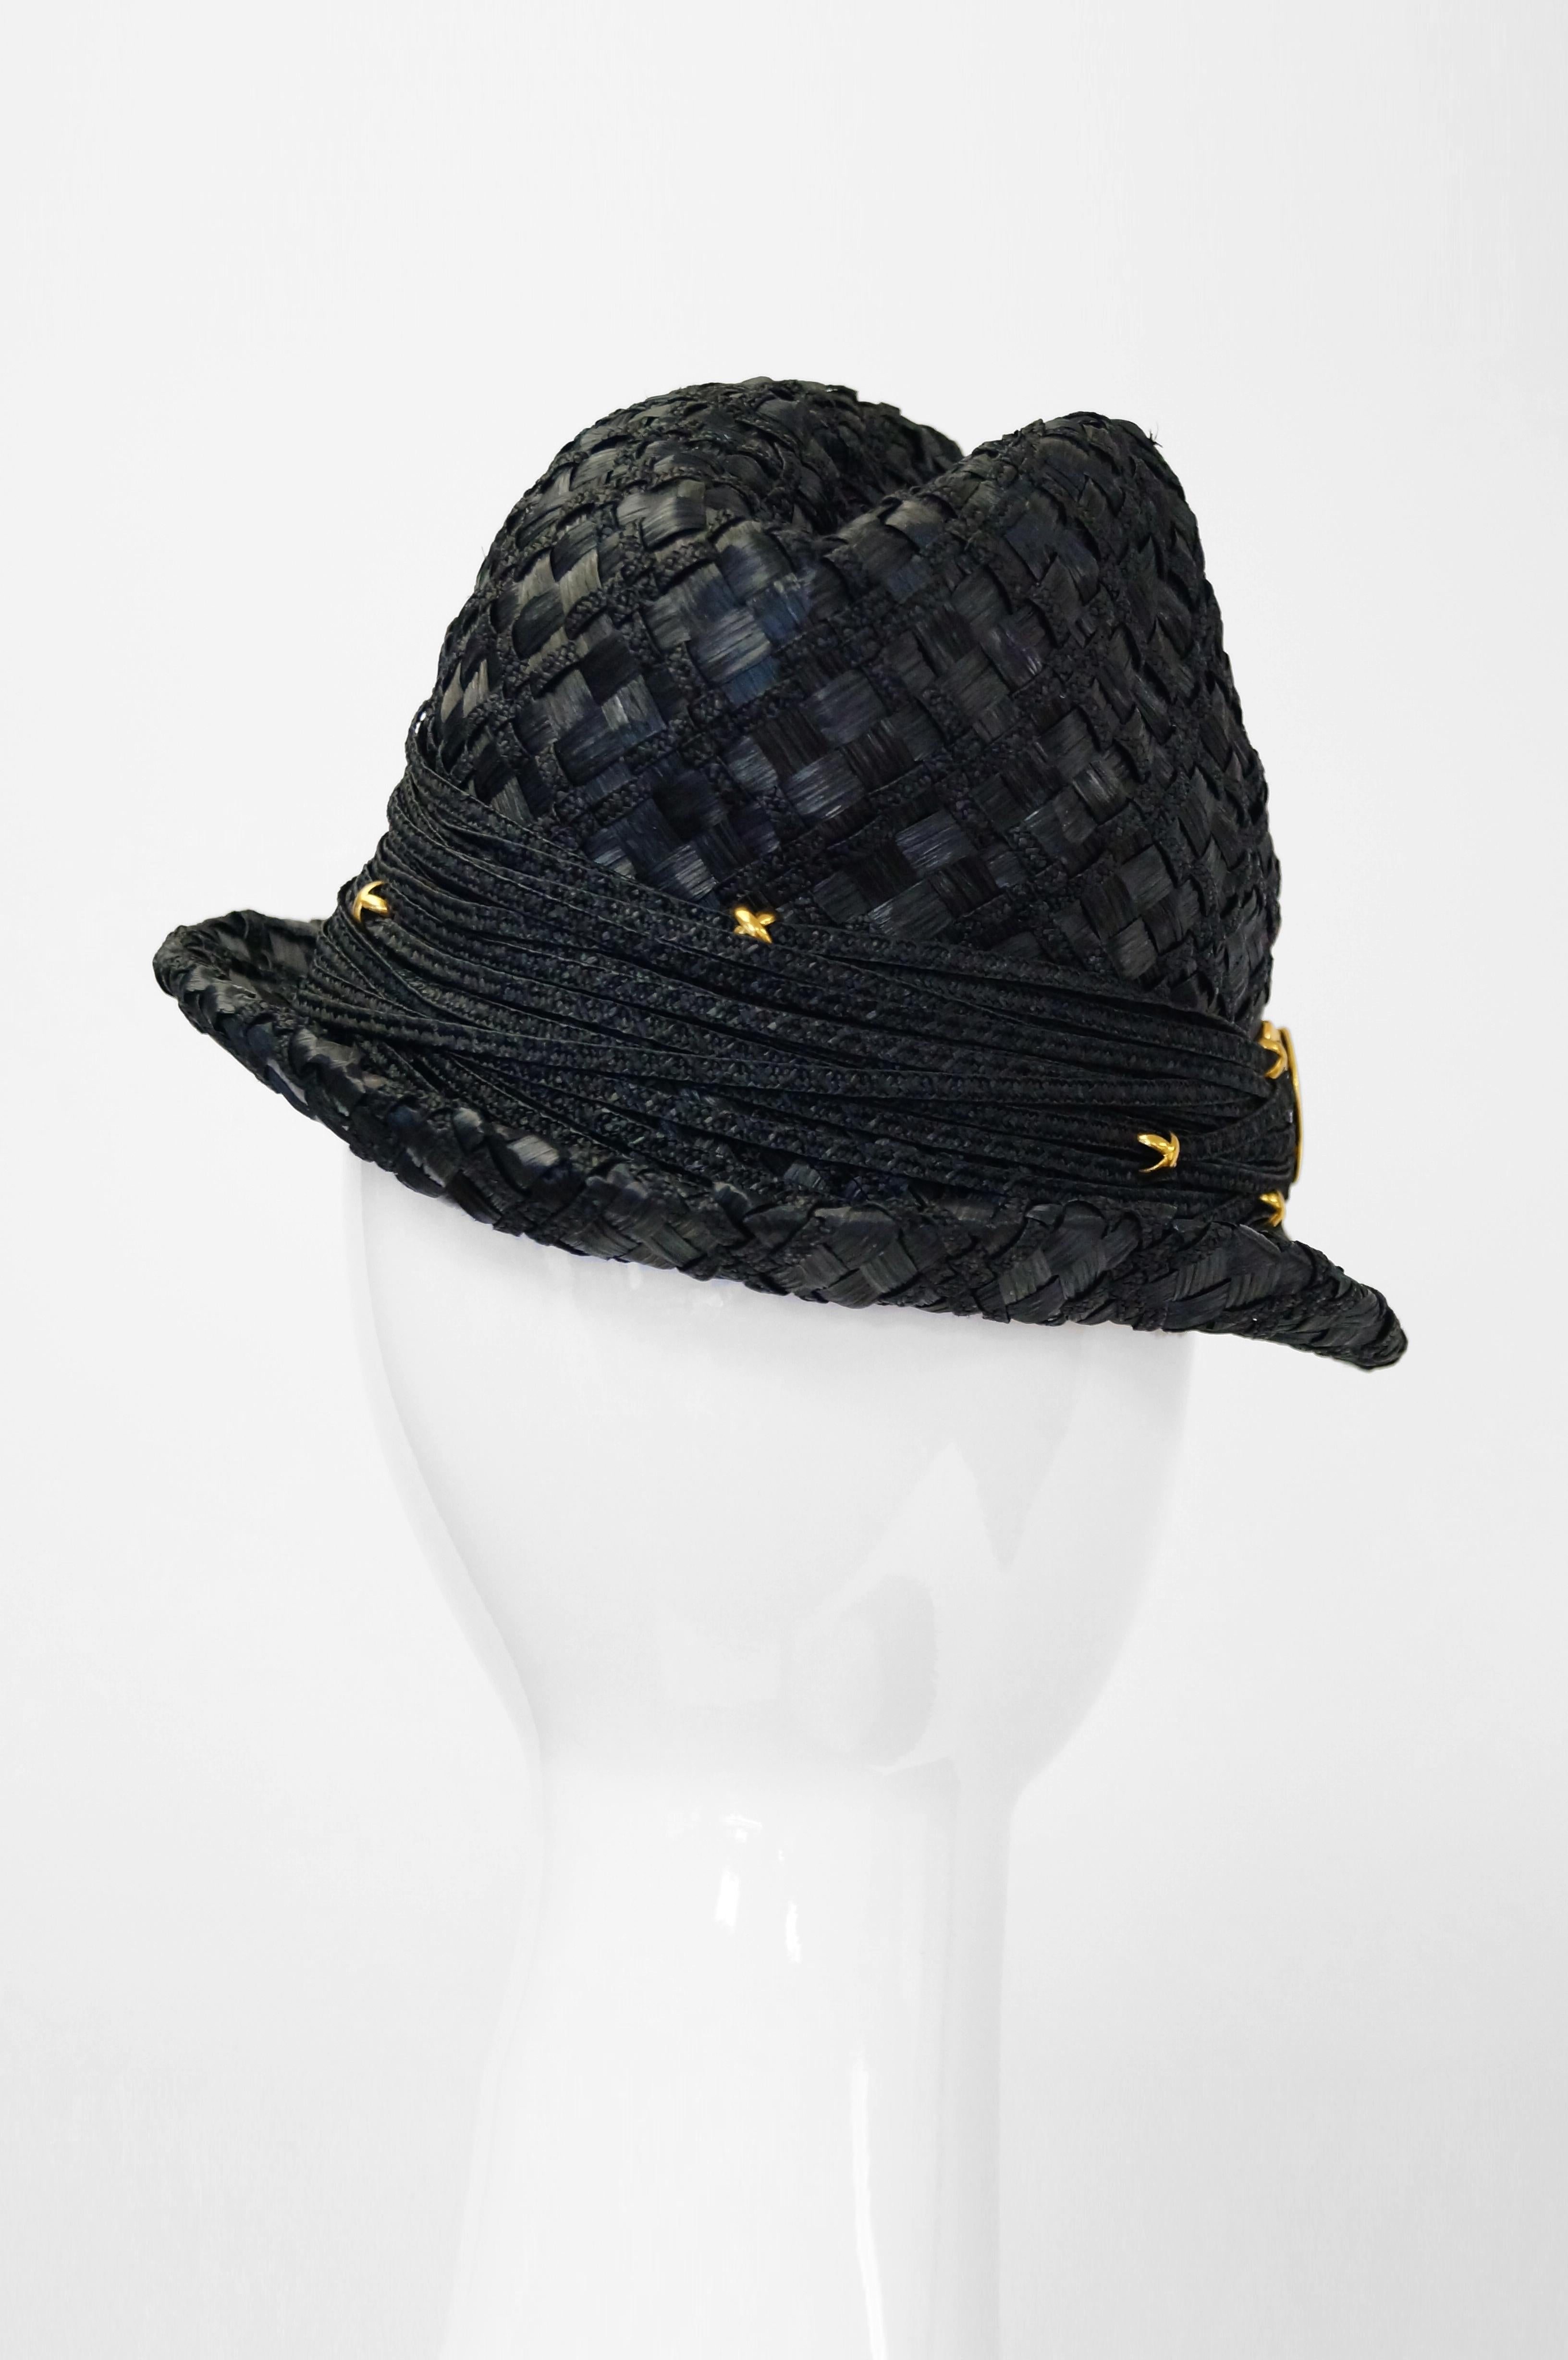 Early 1980s Yves Saint Laurent Woven Trilby Sun Hat In Good Condition For Sale In Houston, TX